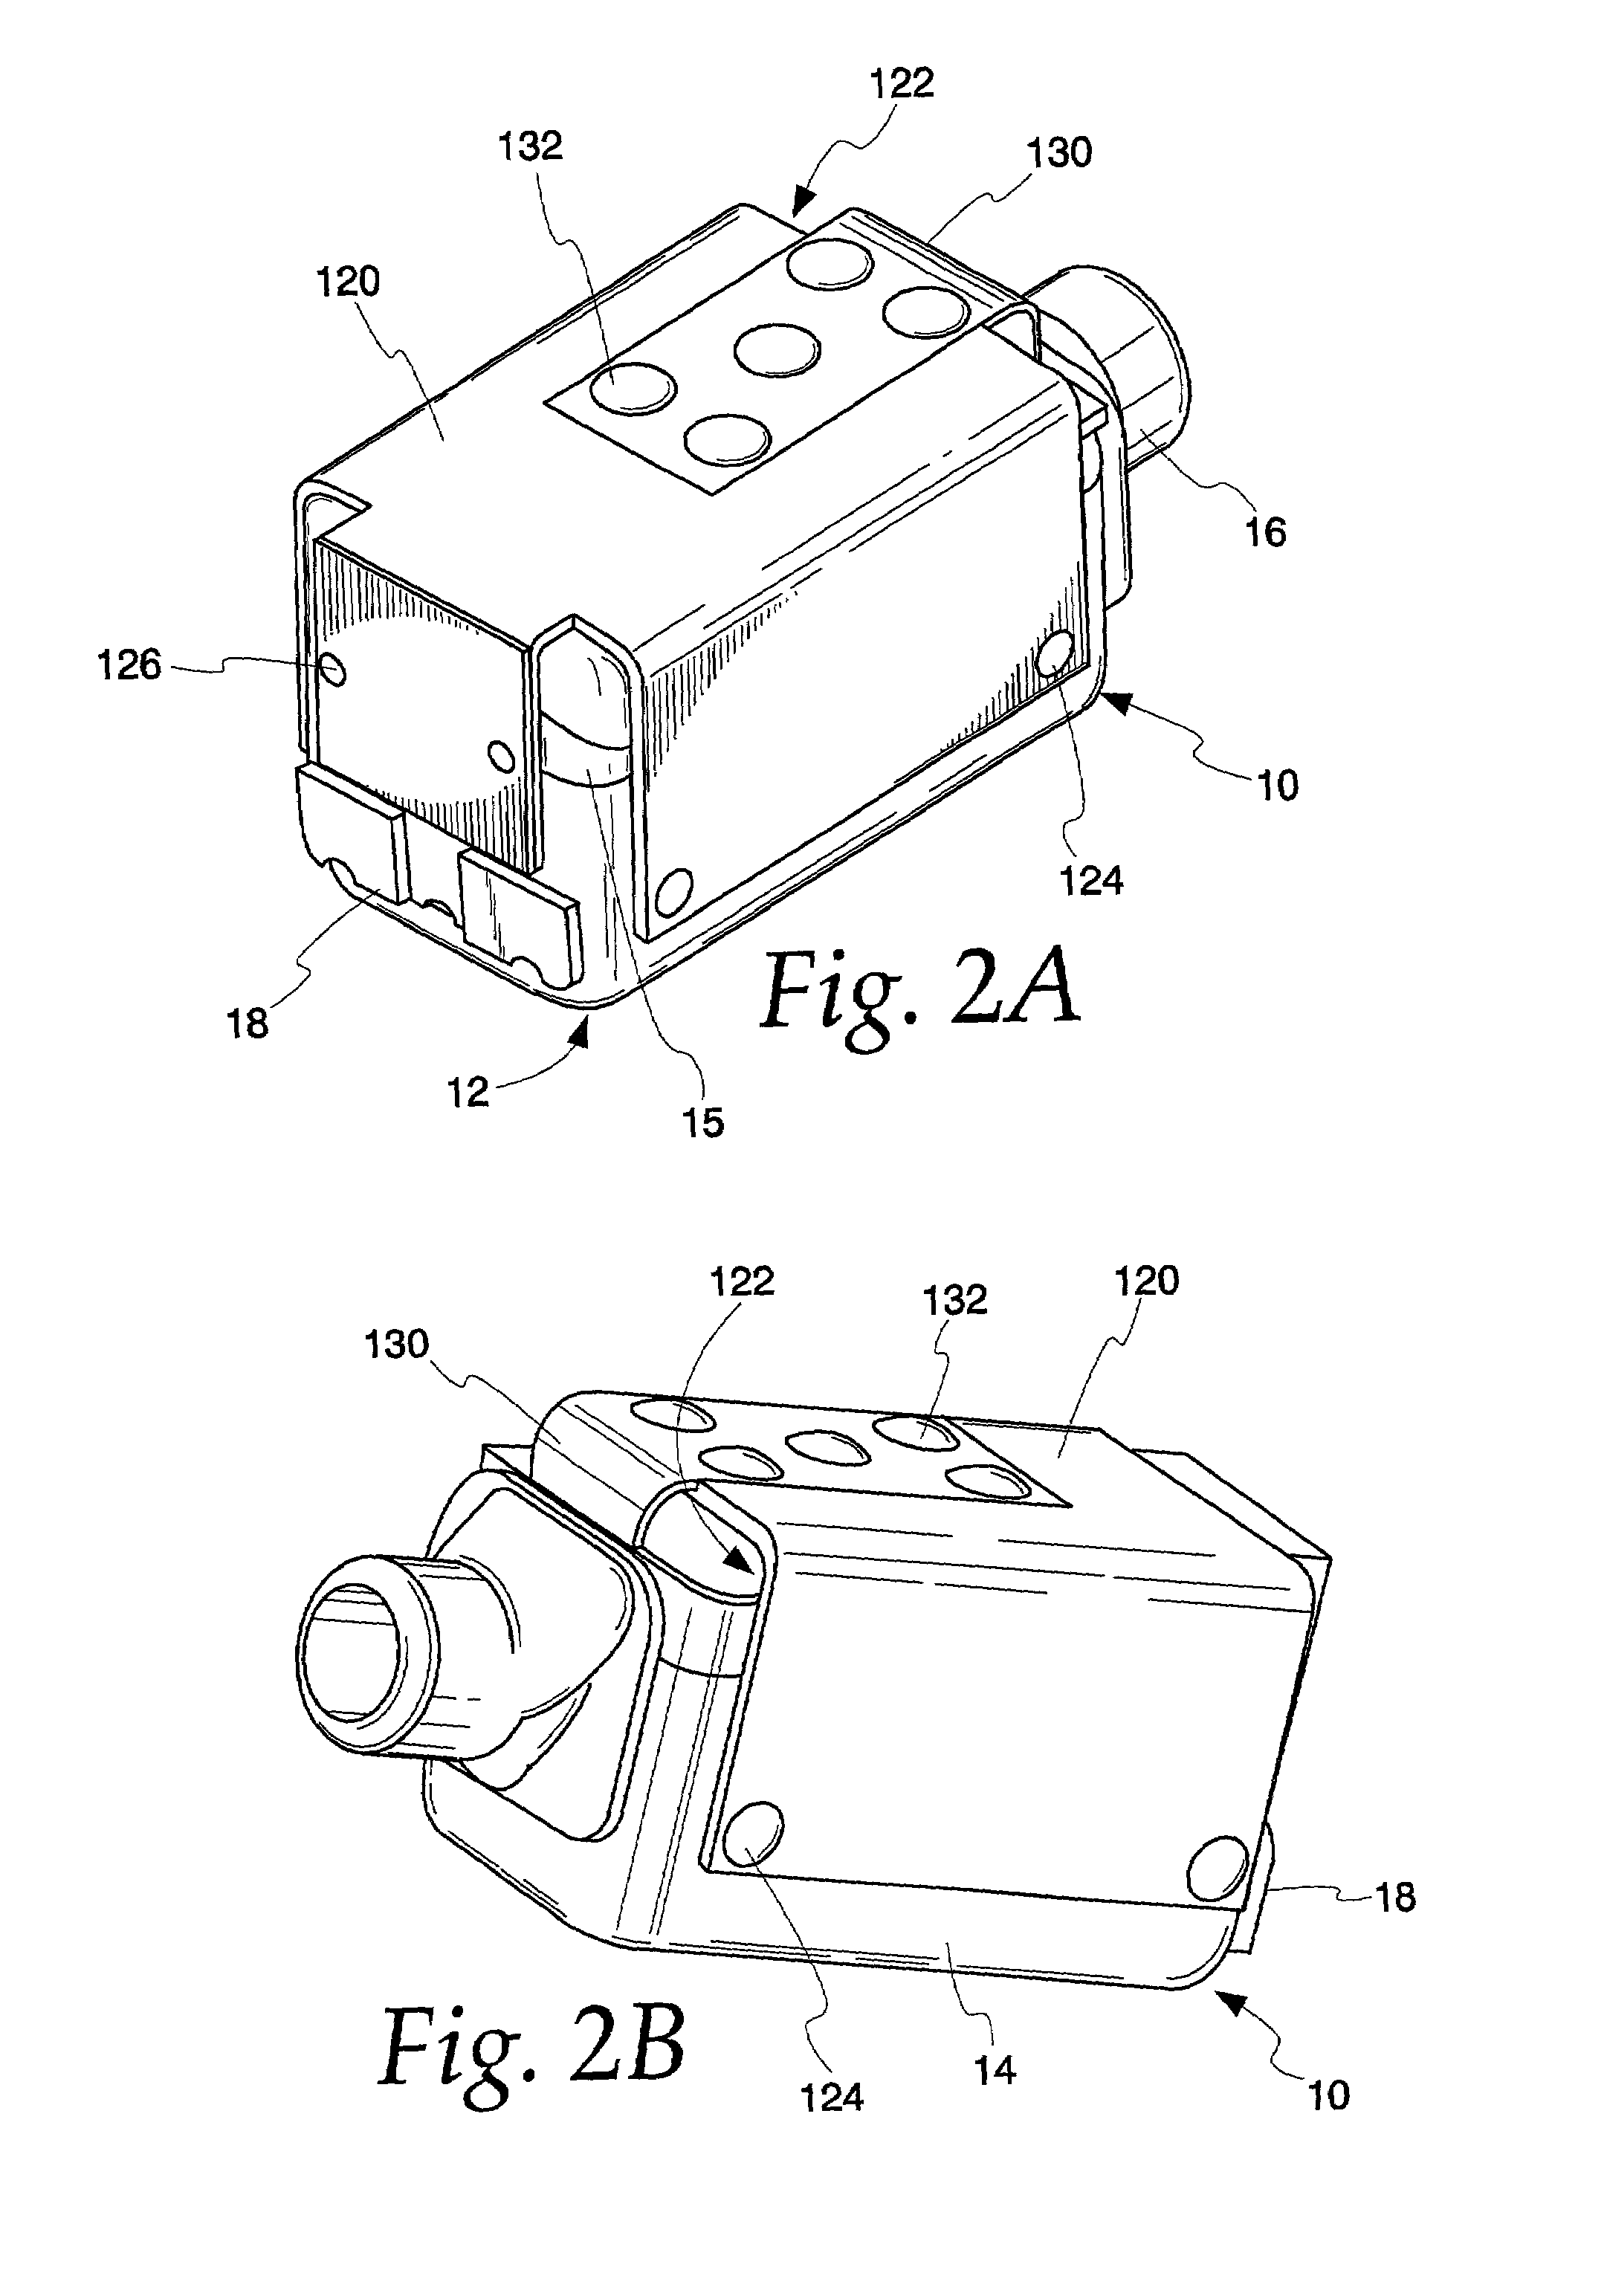 Acoustical receiver housing for hearing aids